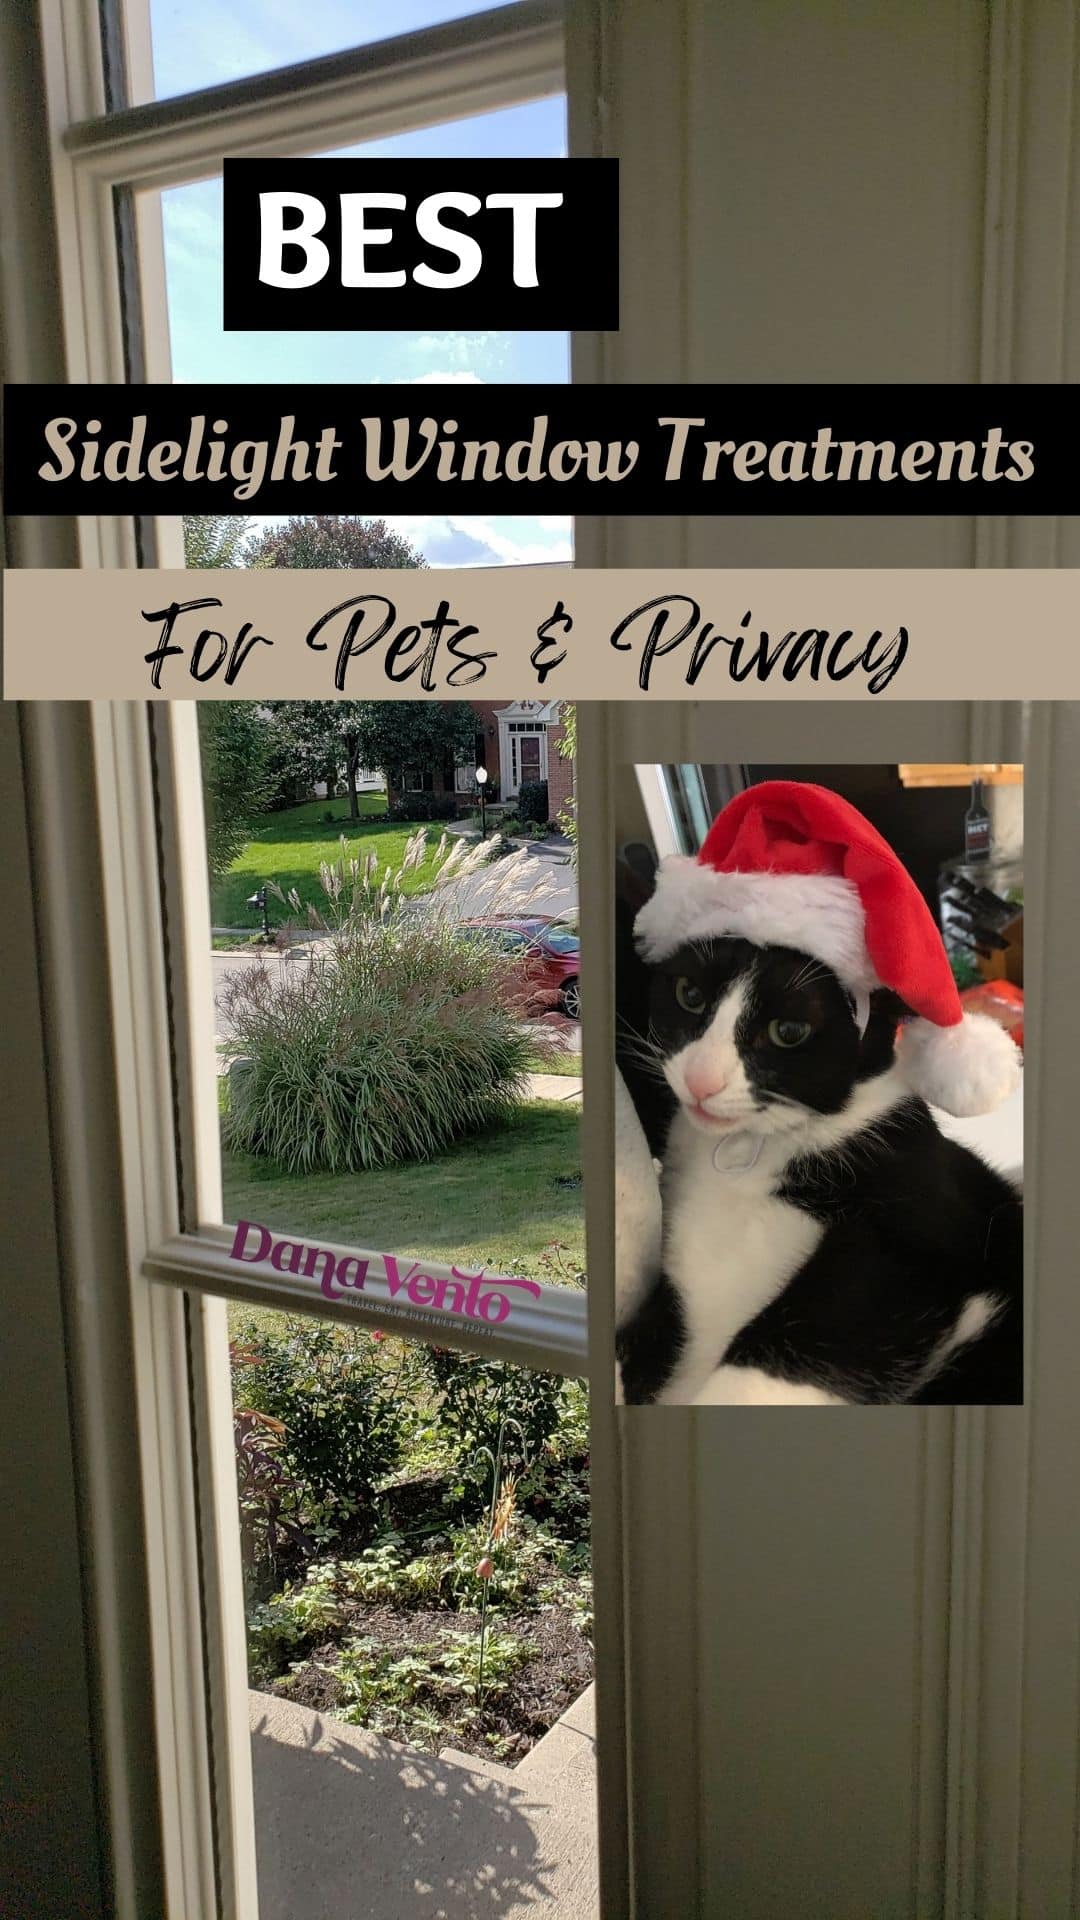 best sidelight window treatments for pets and privacy